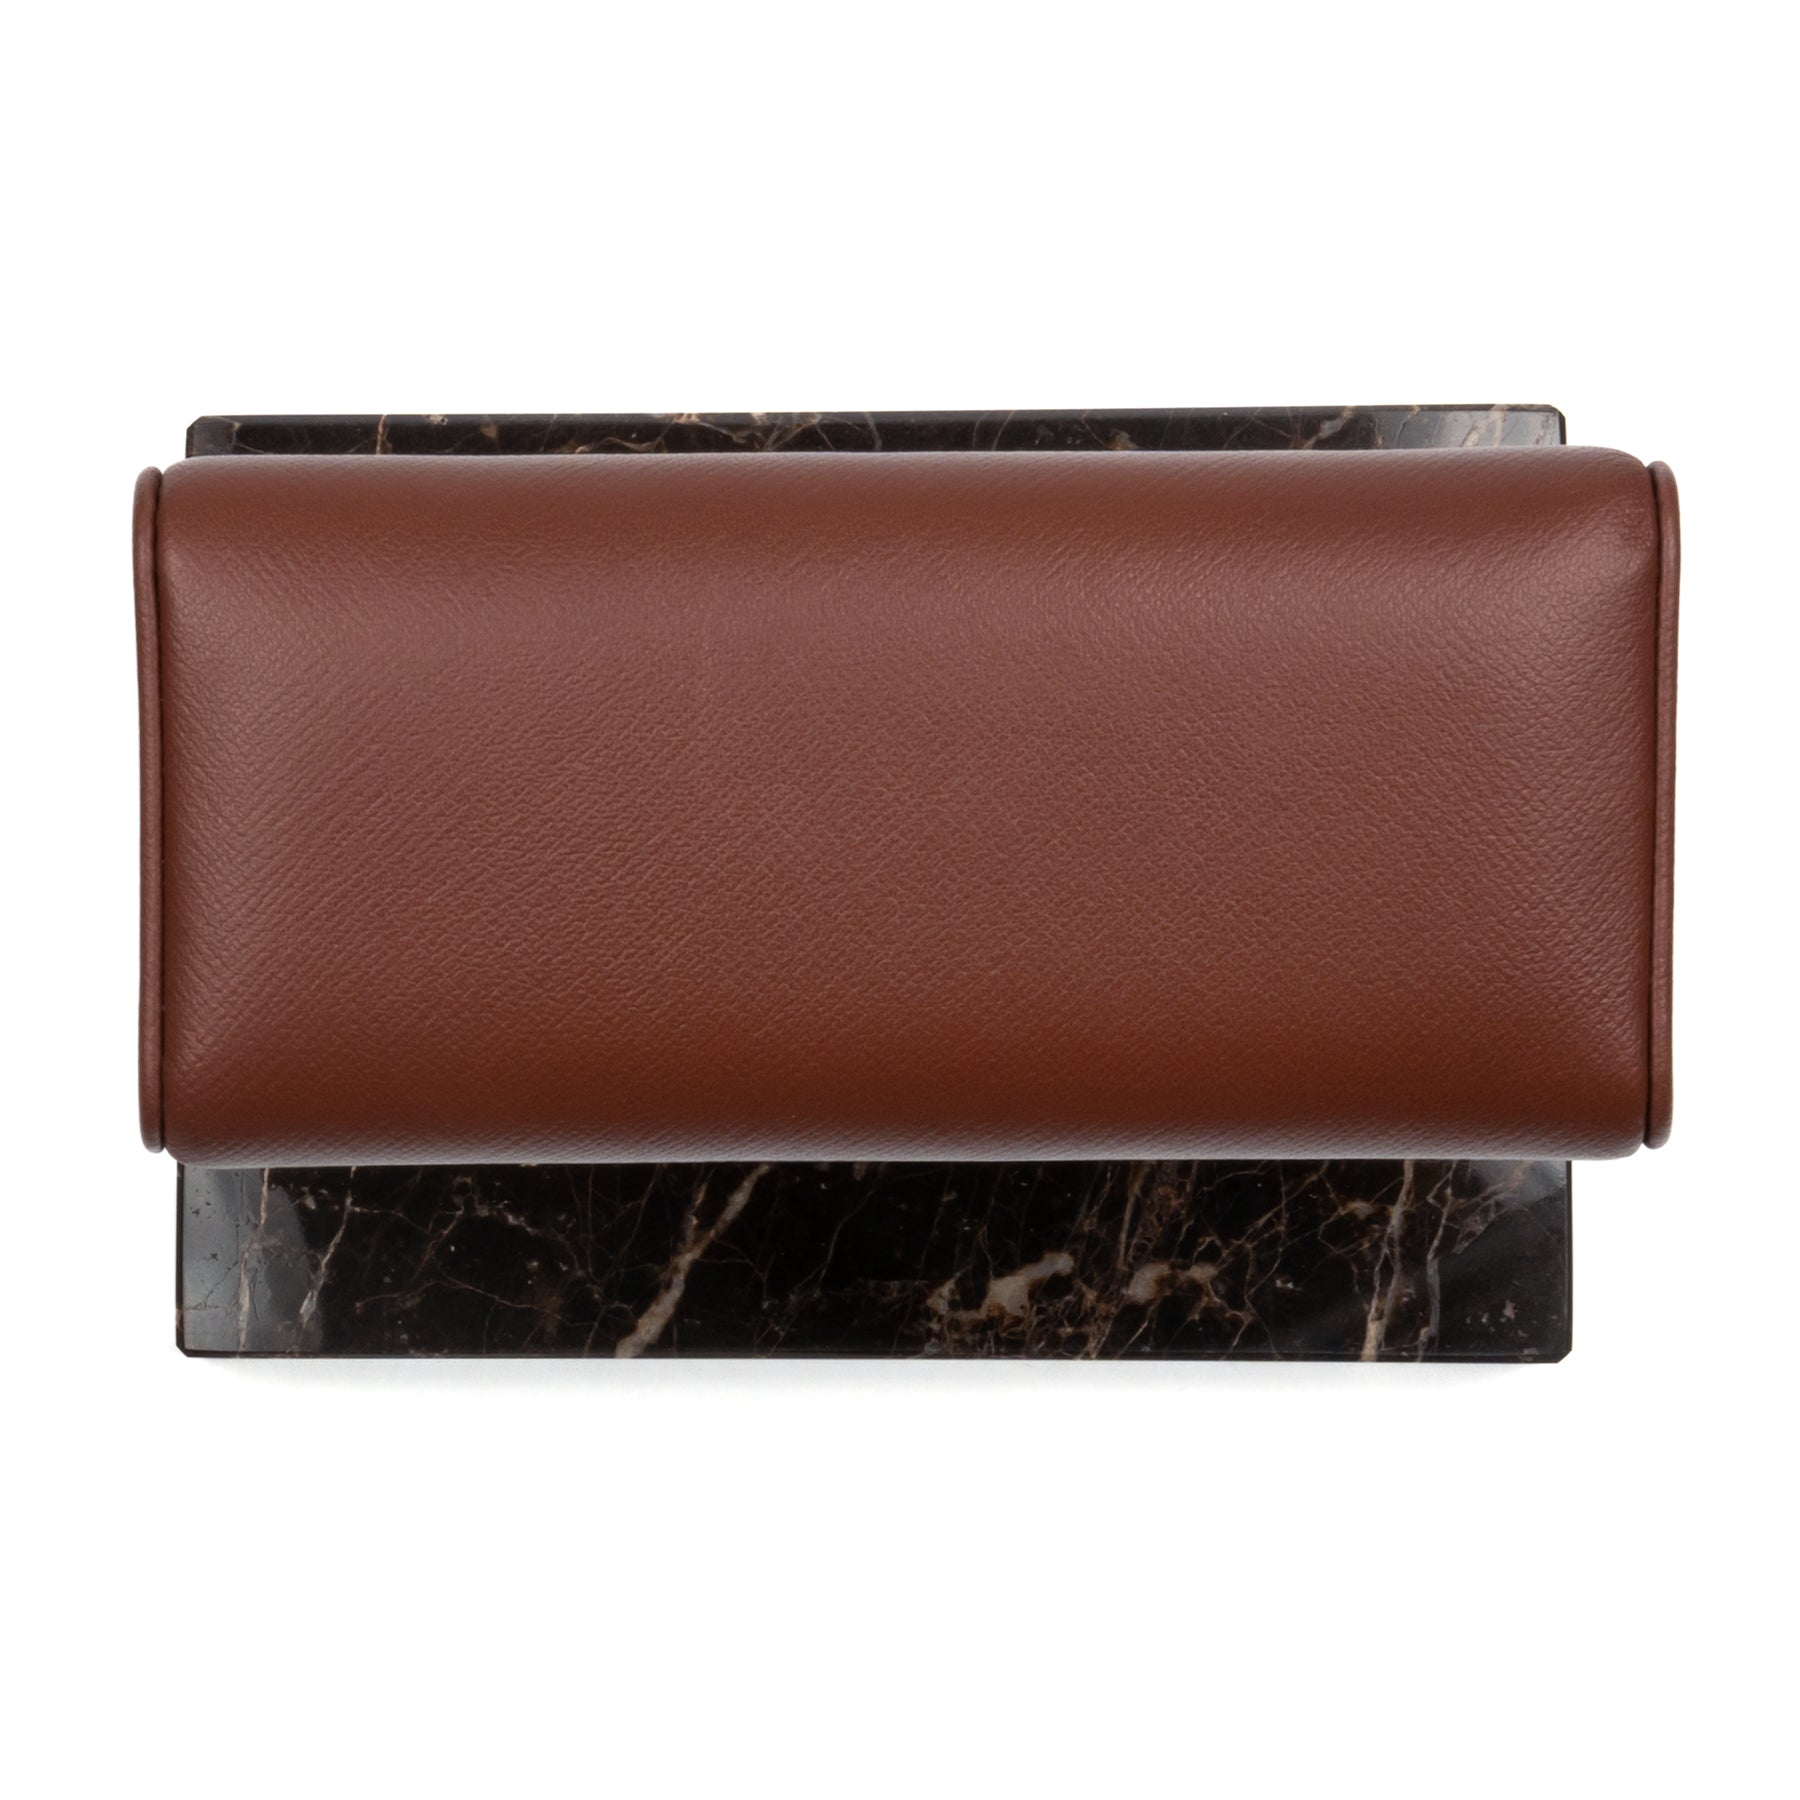 WATCH STAND CLASSIC - DOUBLE - BROWN & BROWN SAFFIANO